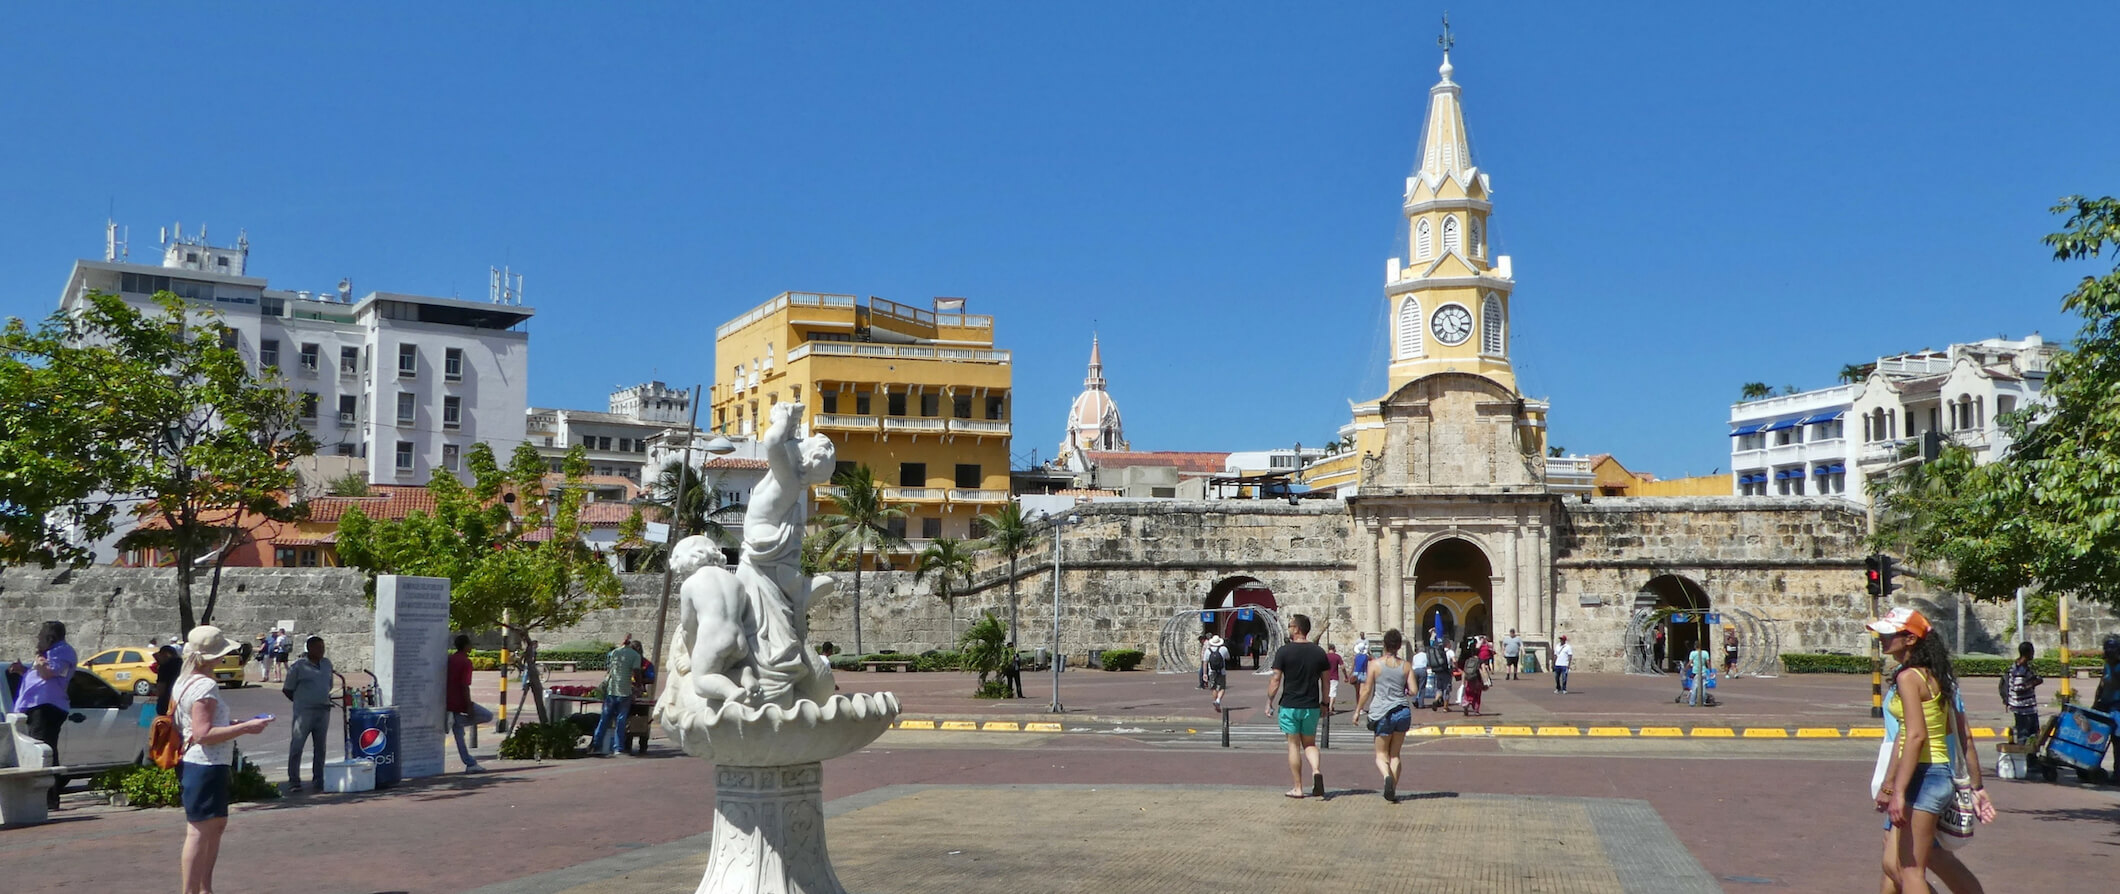 how many tourists visit cartagena each year